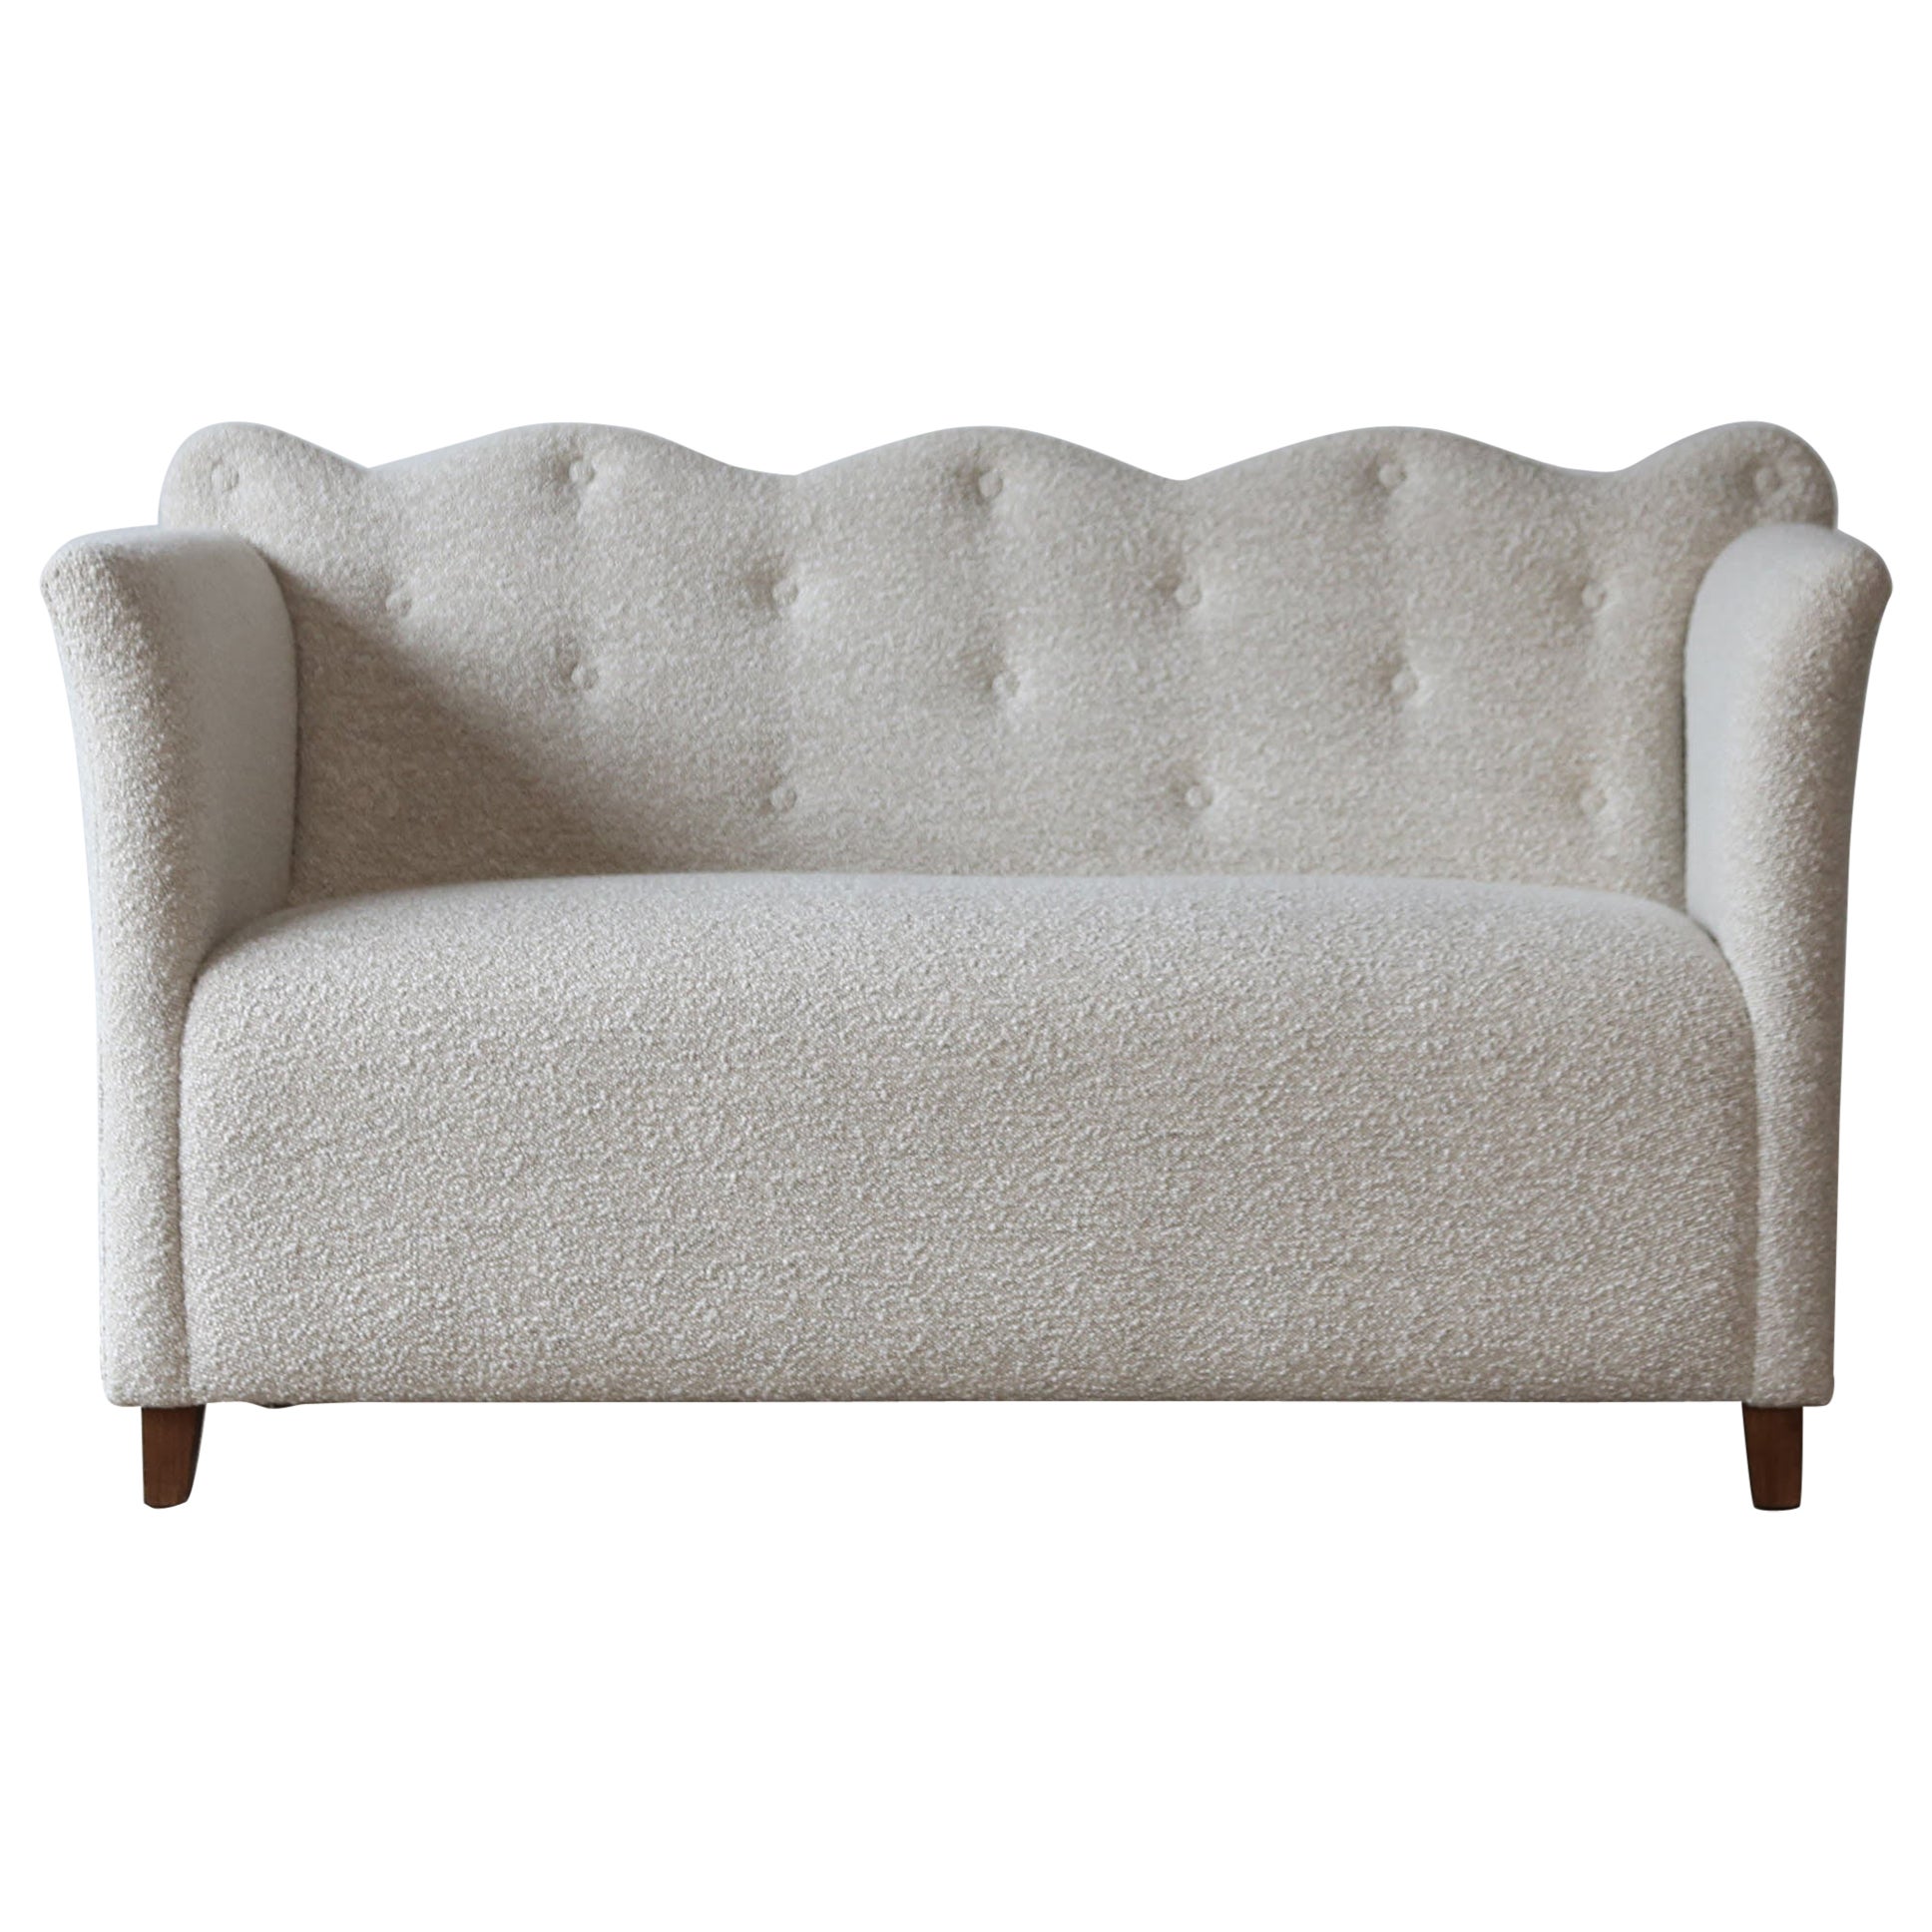 Wavy Back Sofa Upholstered in Lelievre Wool Boucle For Sale